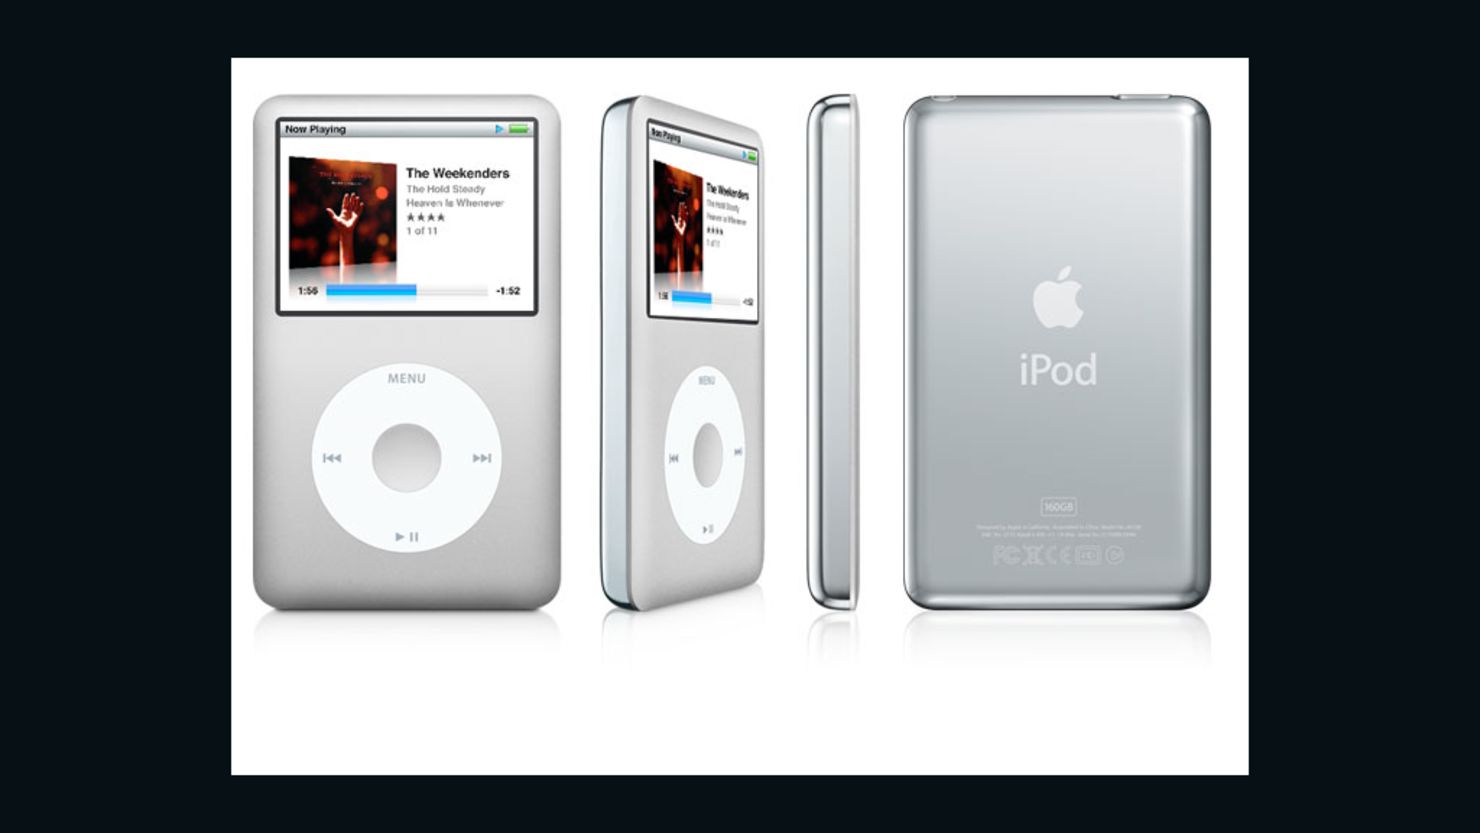 Several iPod users filed an antitrust lawsuit against Apple. Now -- eight years later -- it's gaining steam